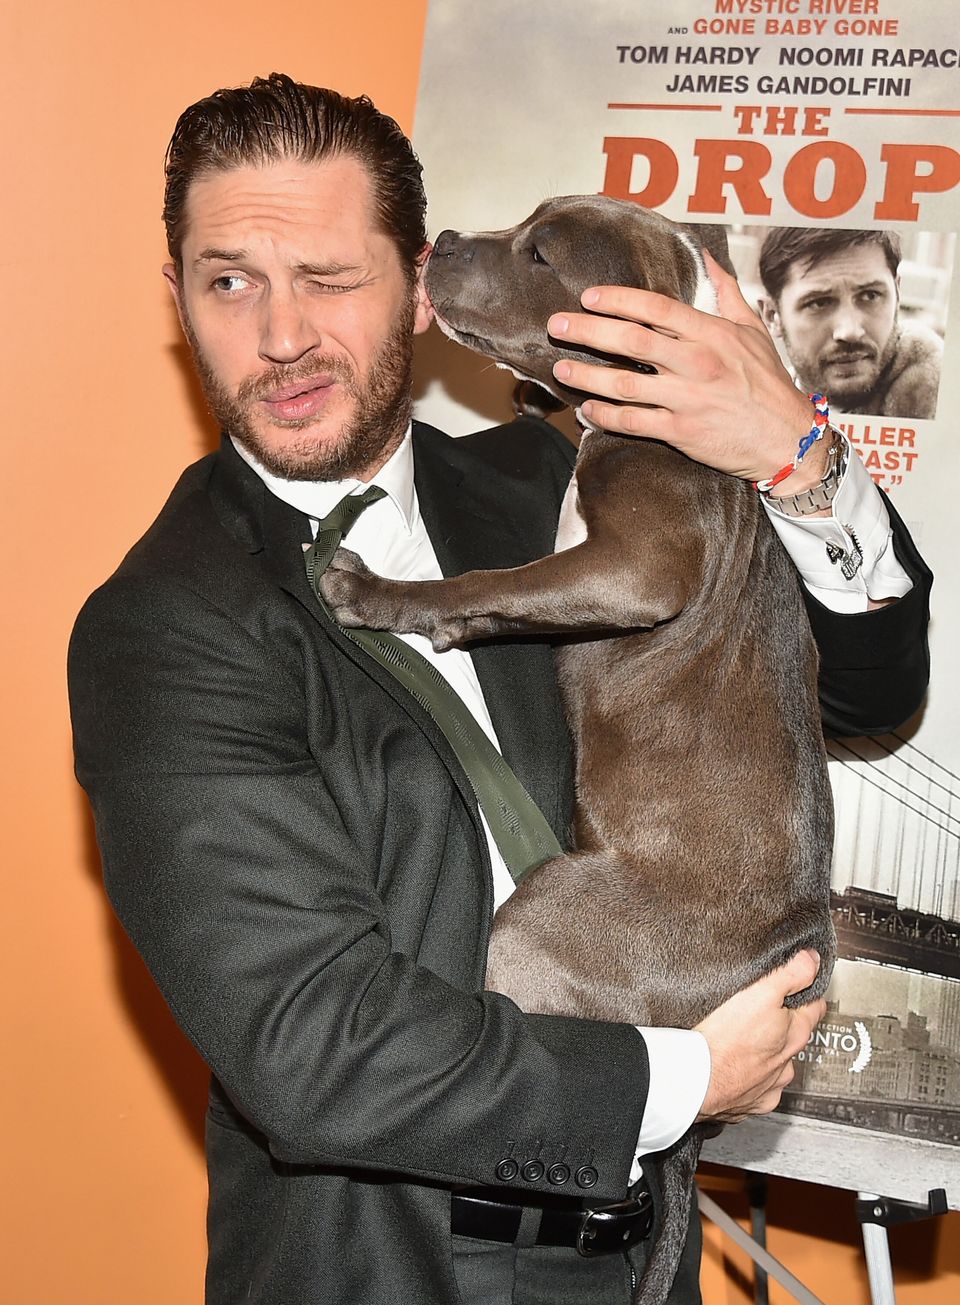 10 Pictures Of Tom Hardy Playing With A Dog At The Premiere Of 'The Drop' |  HuffPost Entertainment